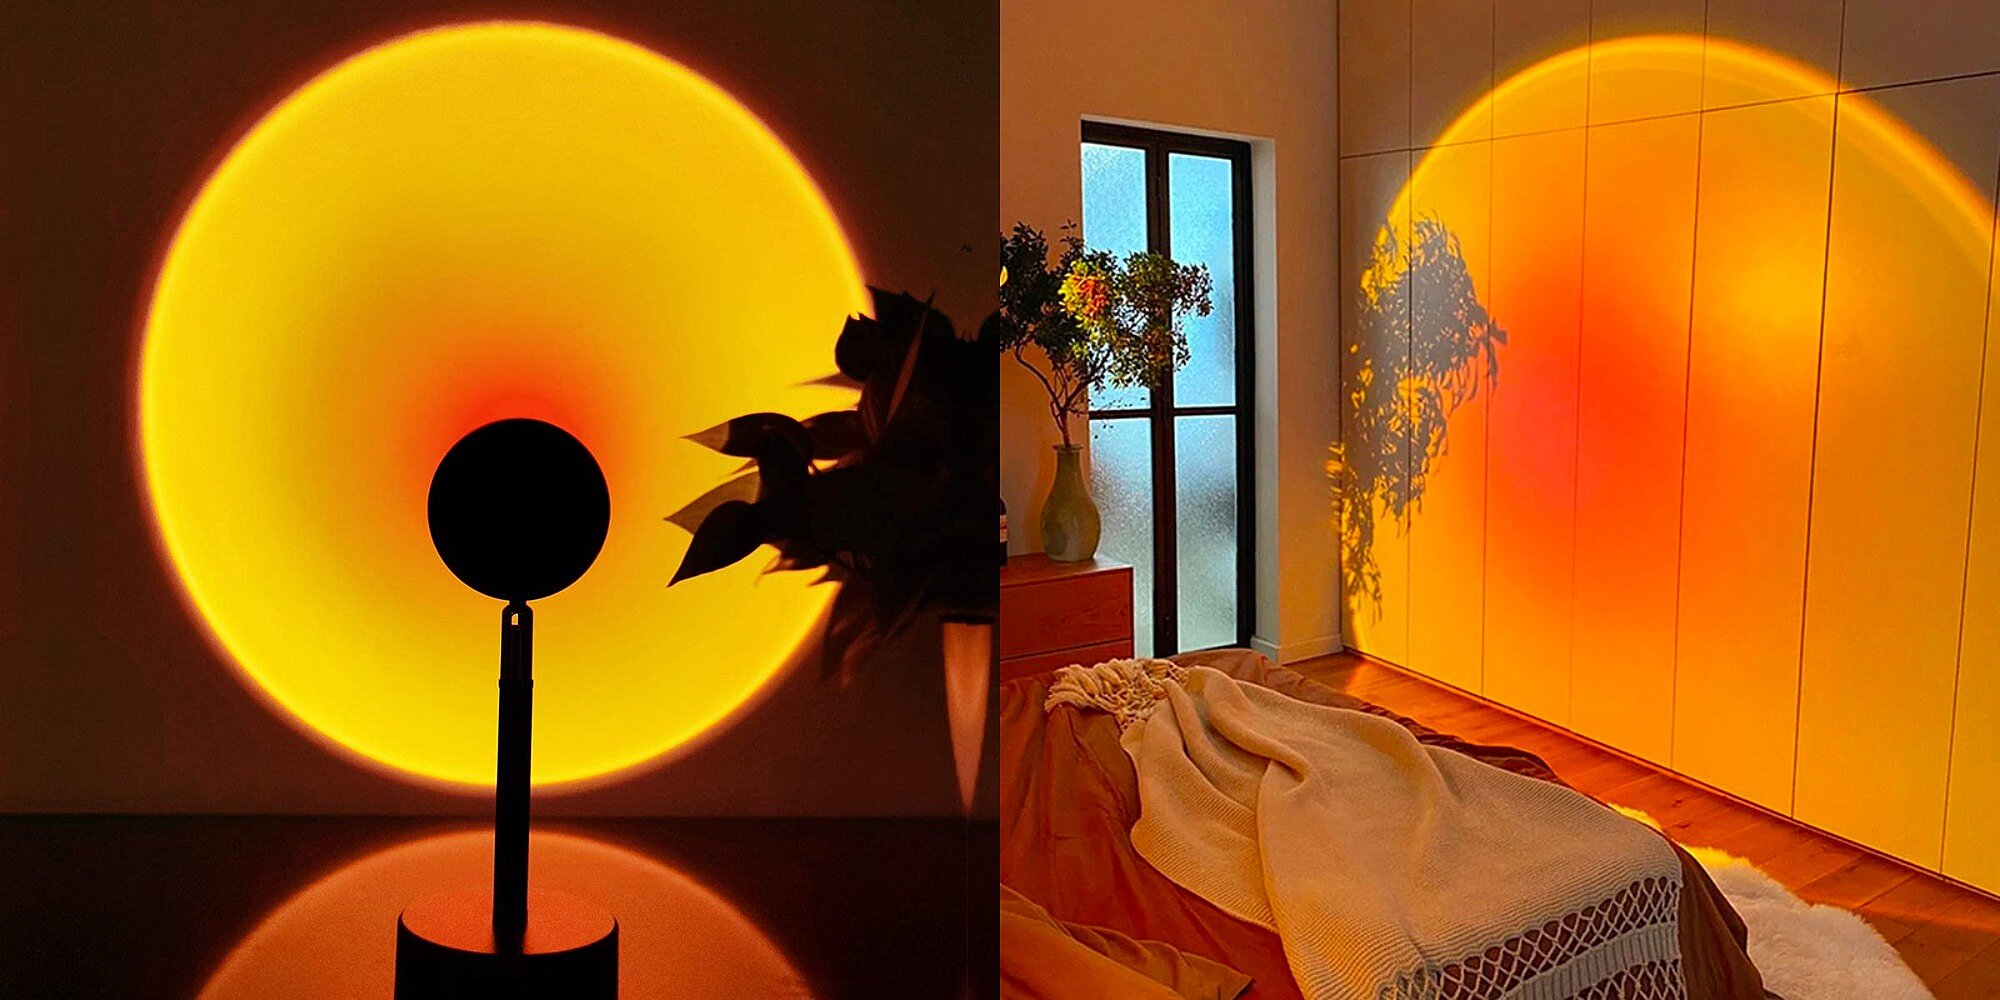 Sunset Lamp / Here is our roundup of the best sunset lamps to get that